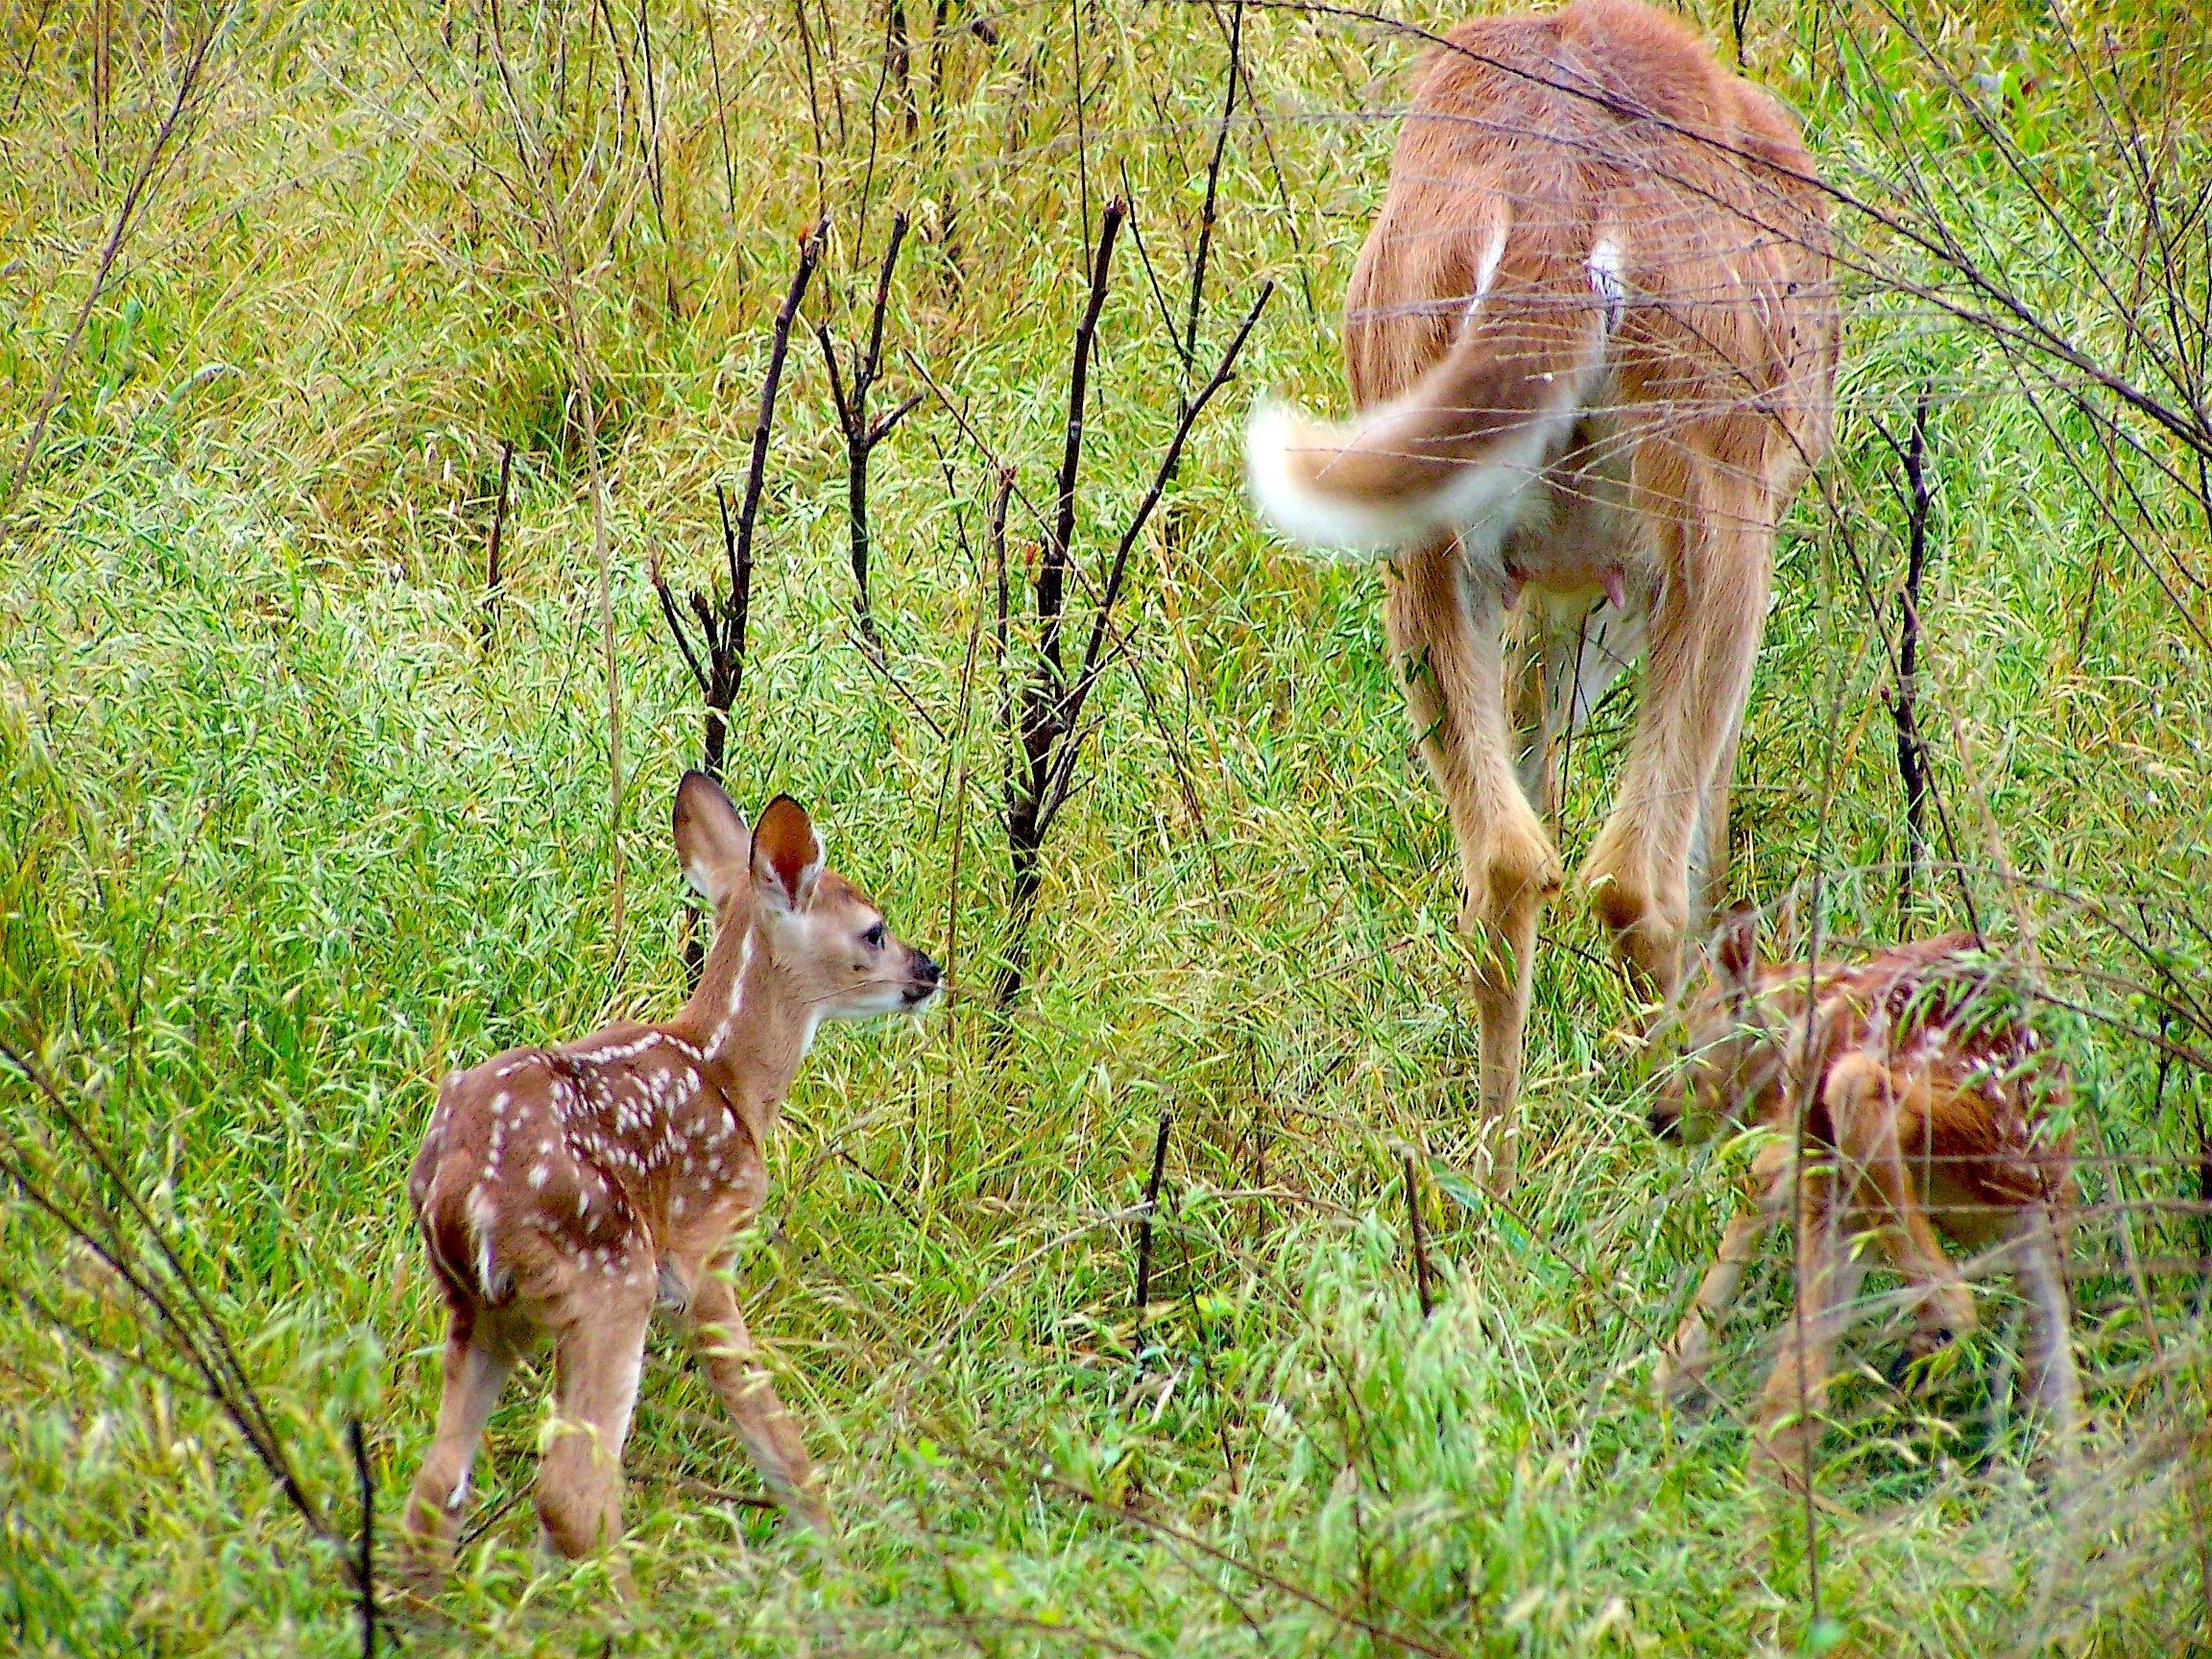 Fawn recruitment in 2000 was 0.89 fawns per doe. In 2015, it was just 0.58 fawns per doe. That's a significant drop in the number of fawns that make it each year. (Josh Honeycutt photo)